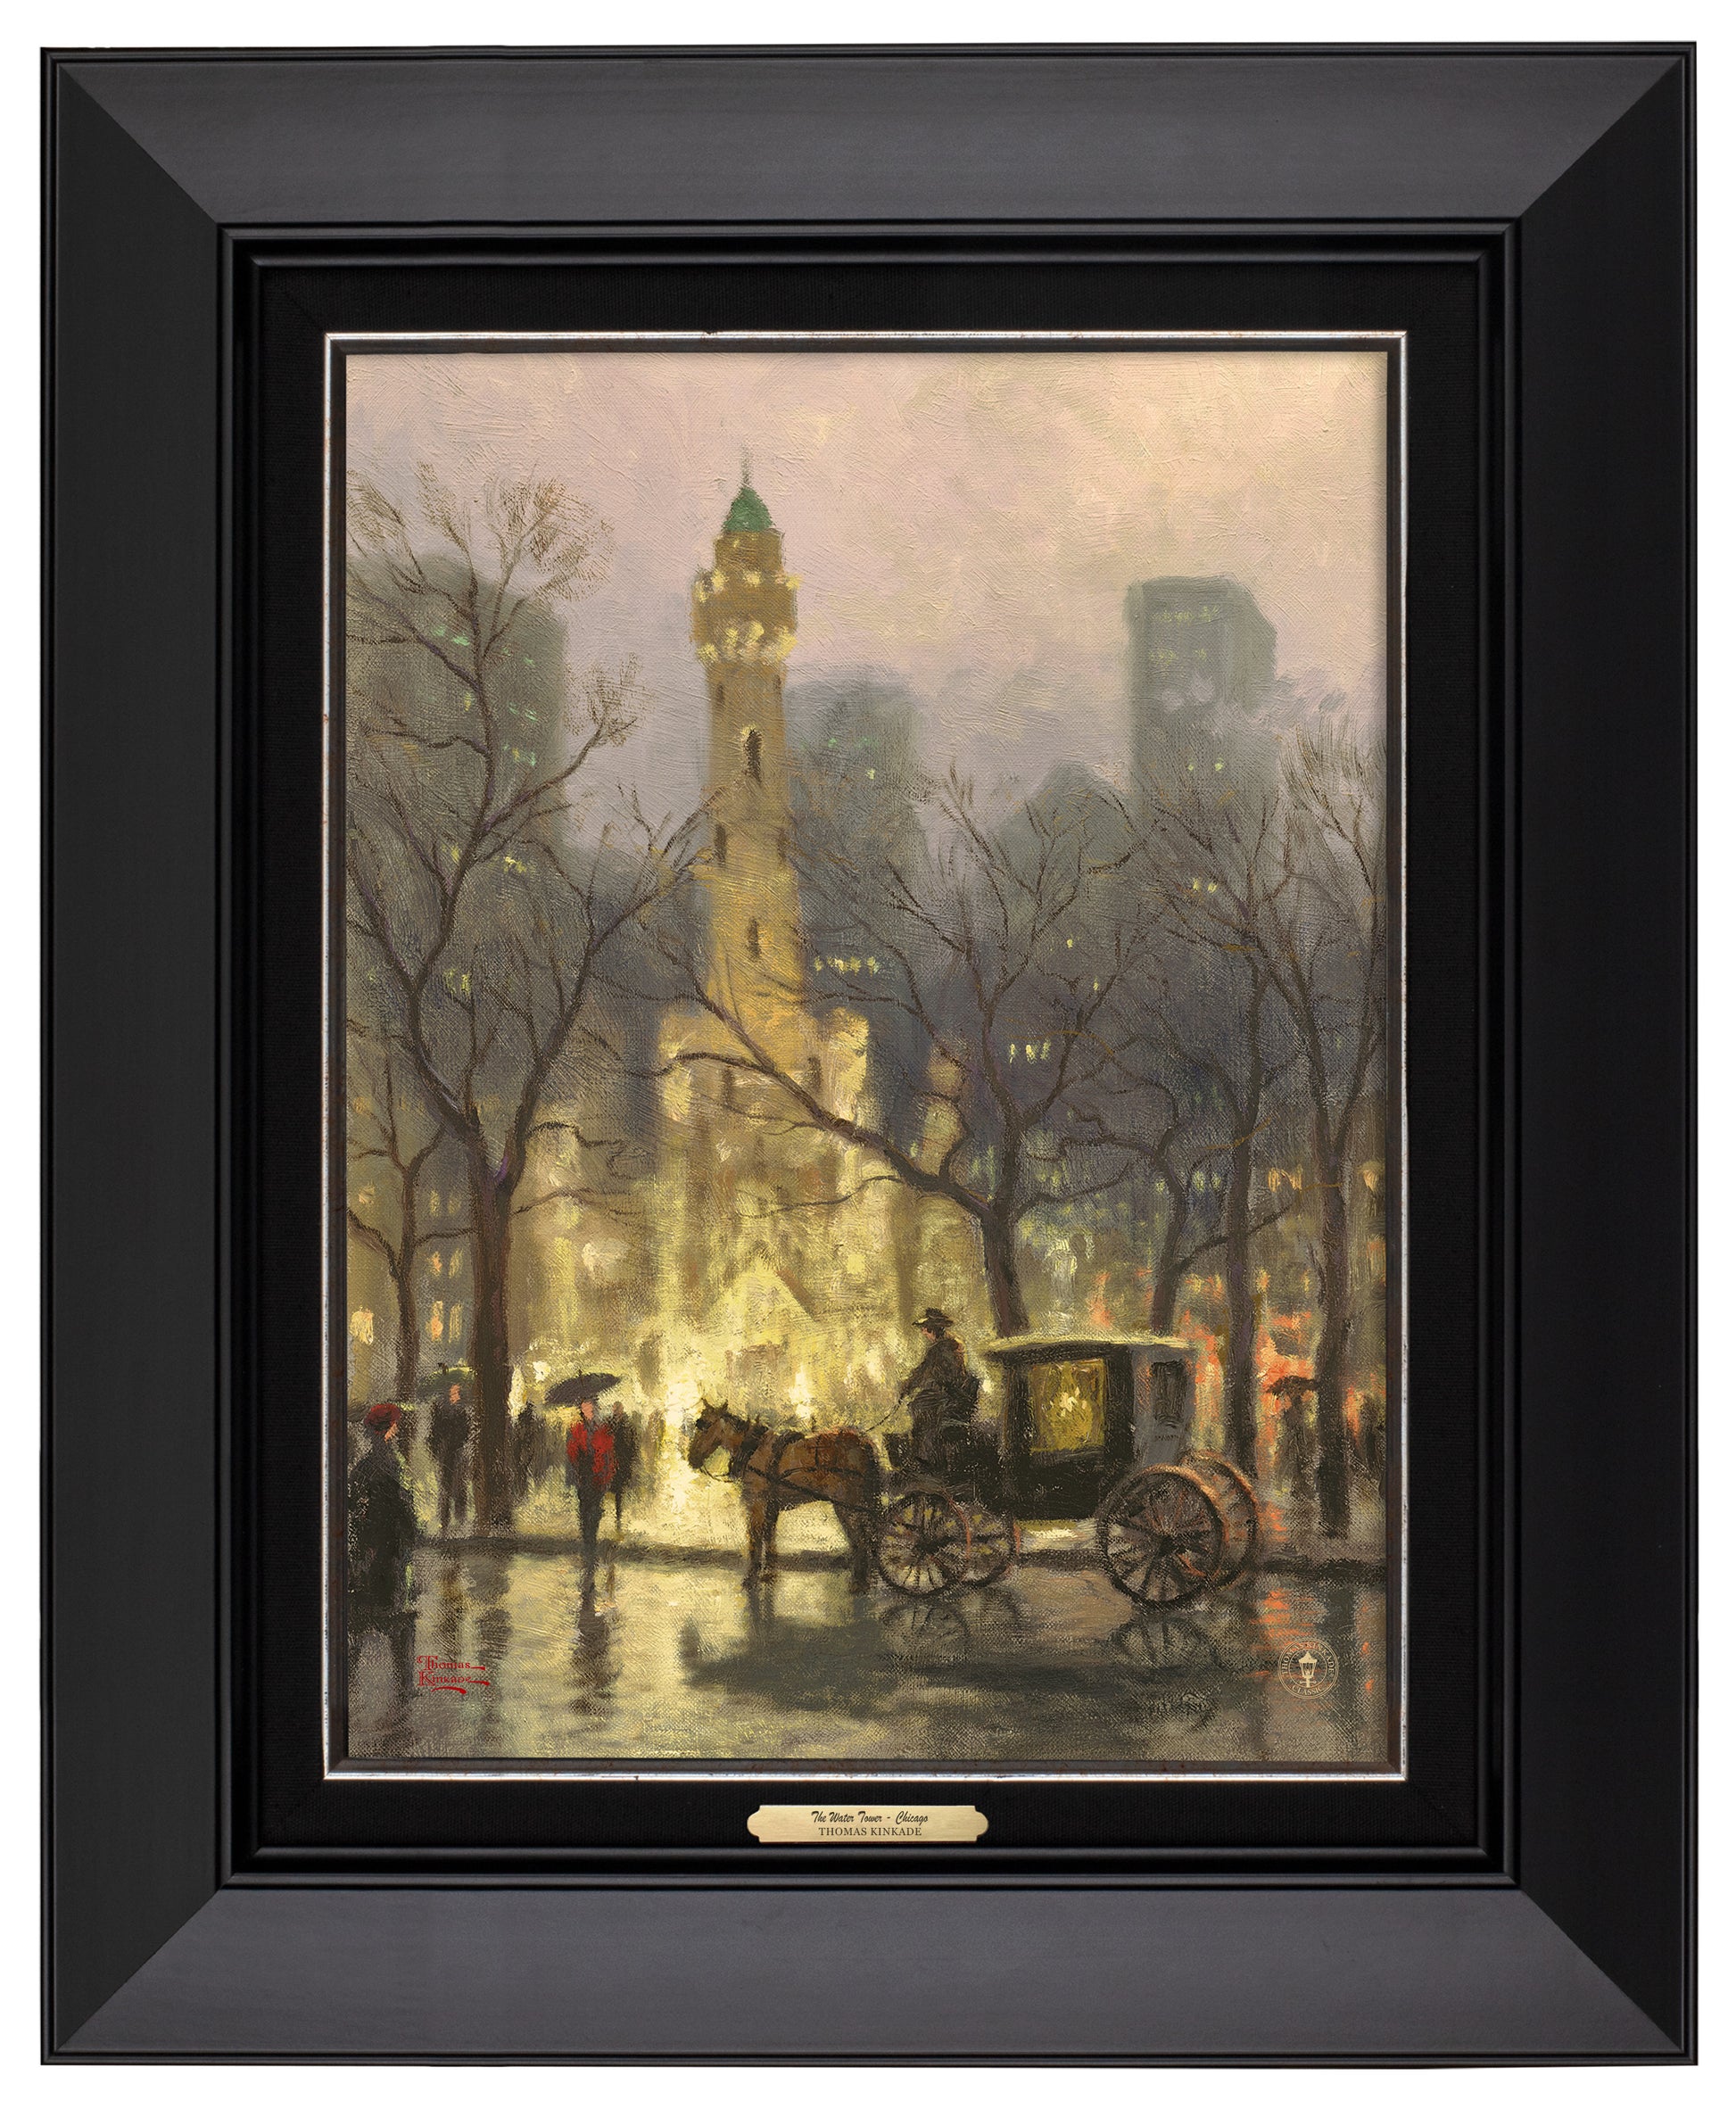 162174_The Water Tower_ Chicago_12x16_Black_CLF VERTICAL.jpg